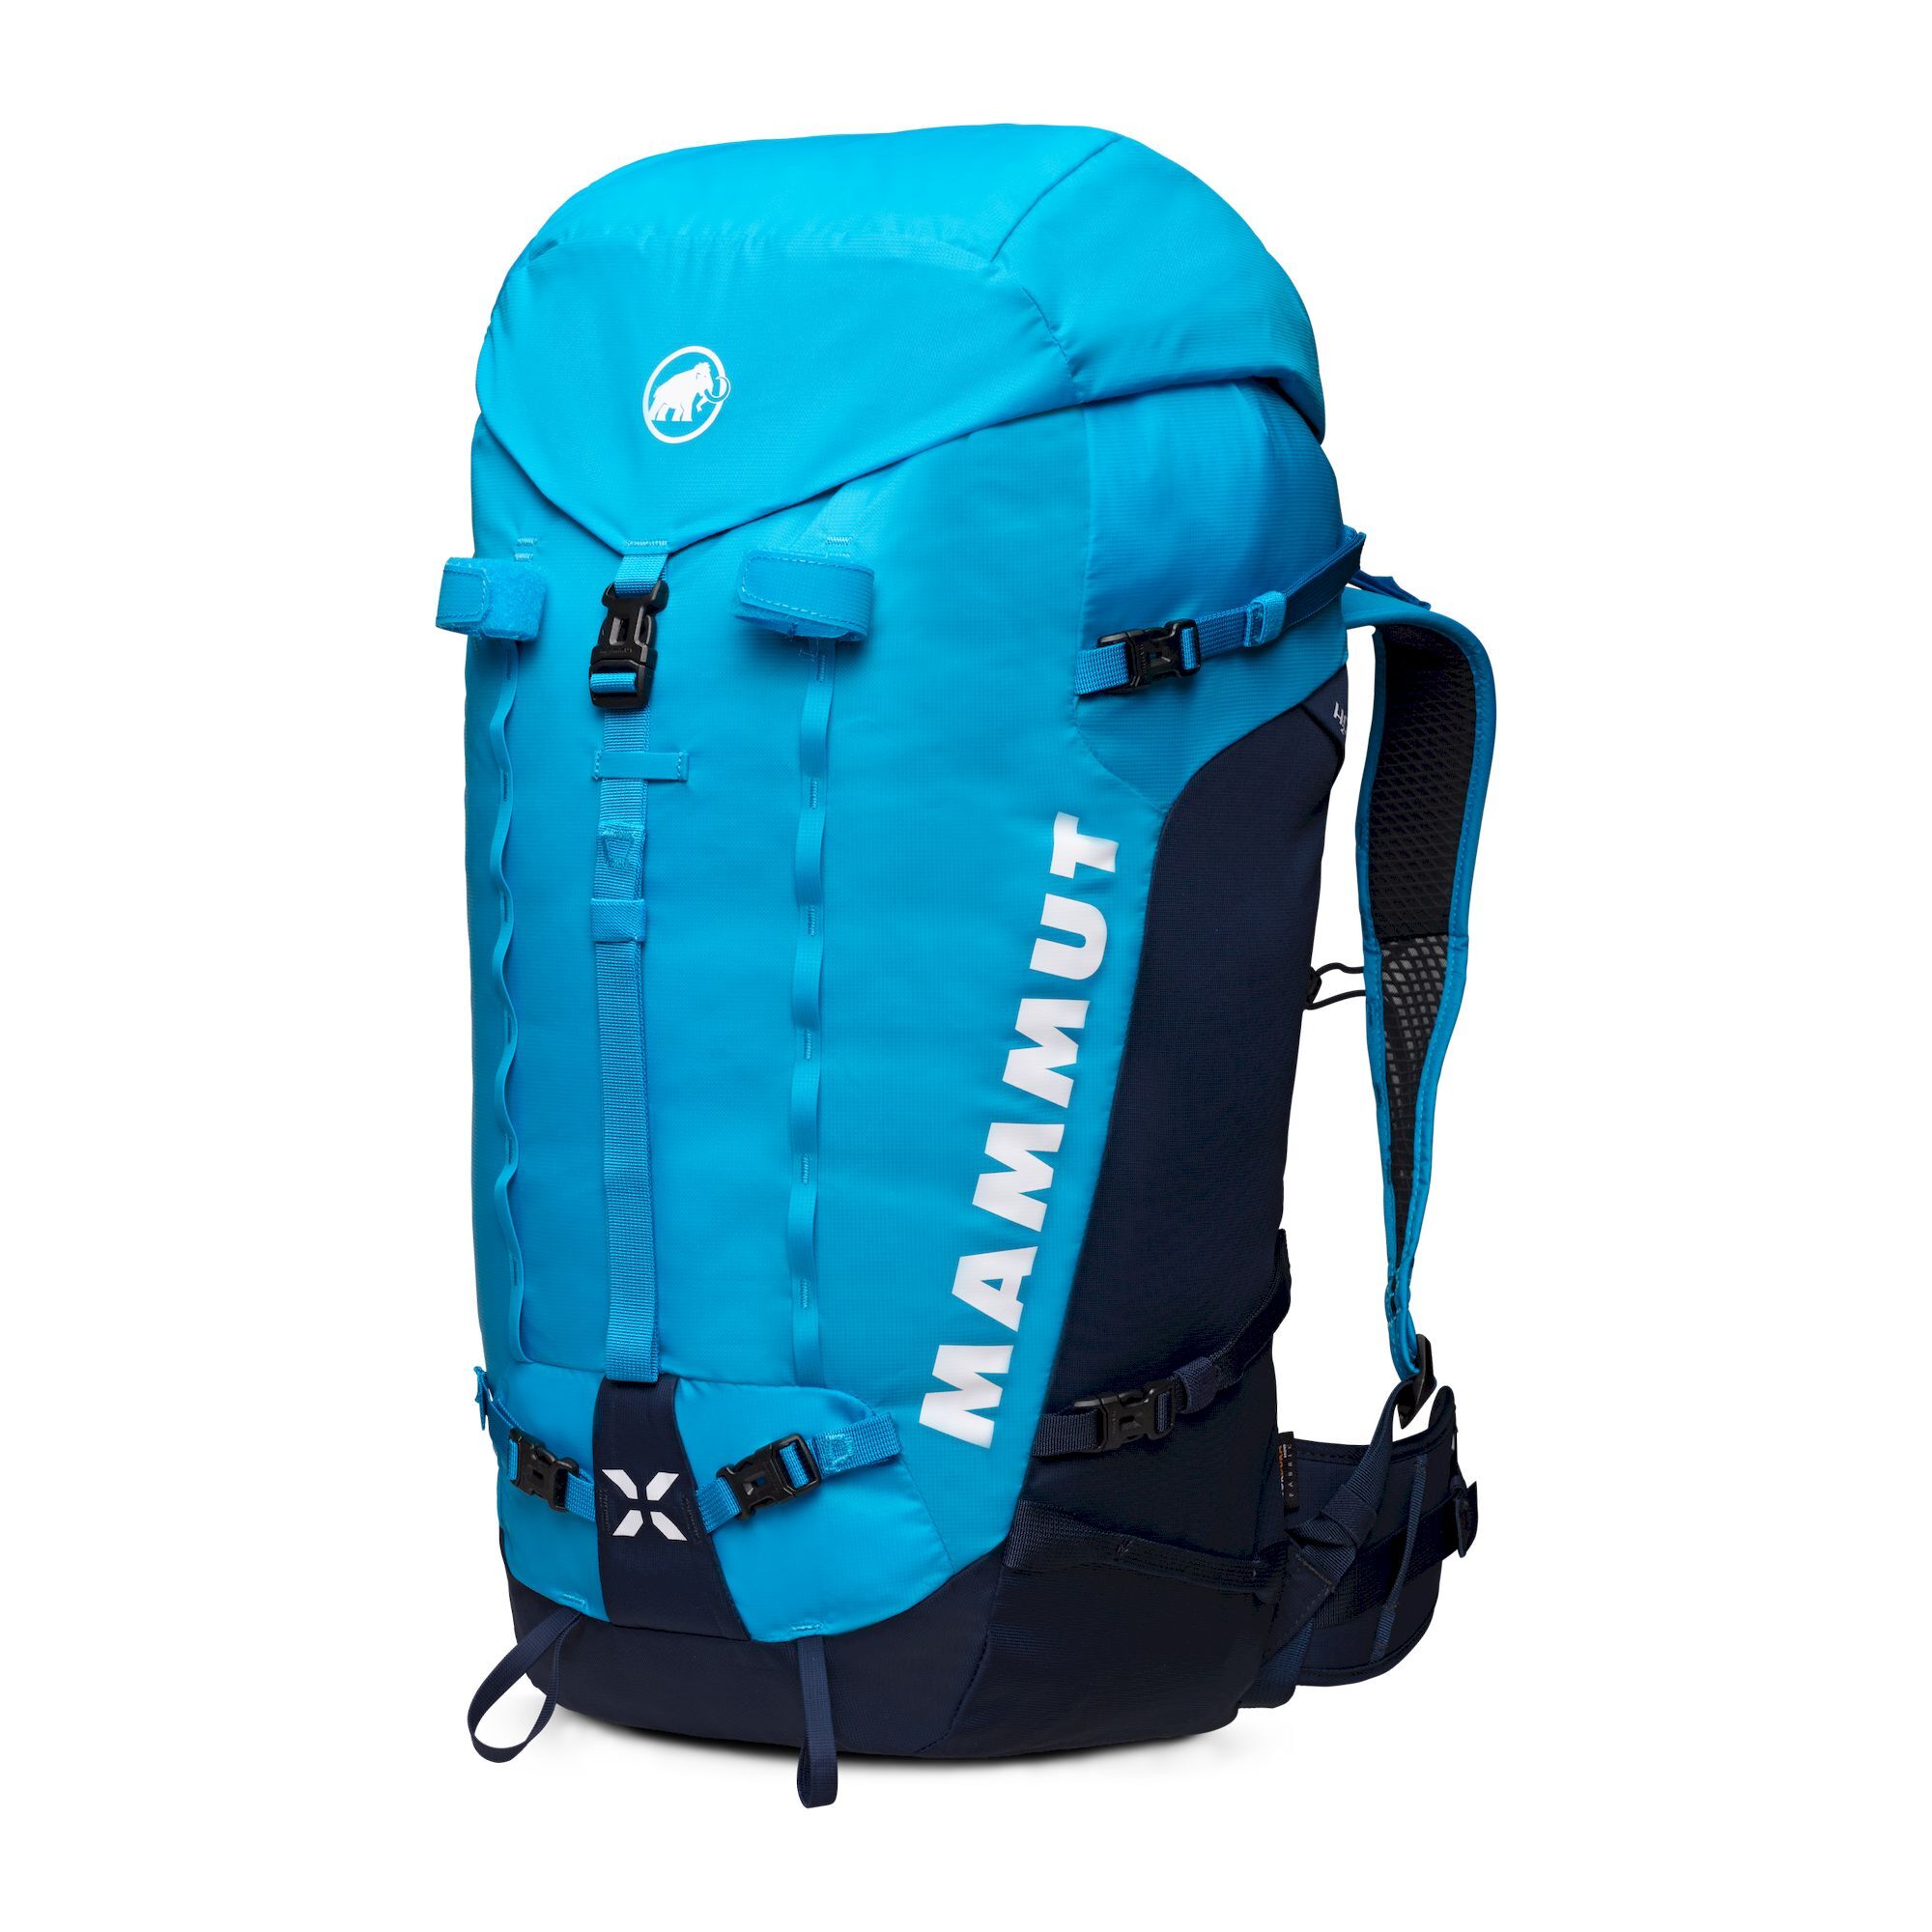 Mammut Trion Nordwand 38 - Mountaineering backpack - Women's